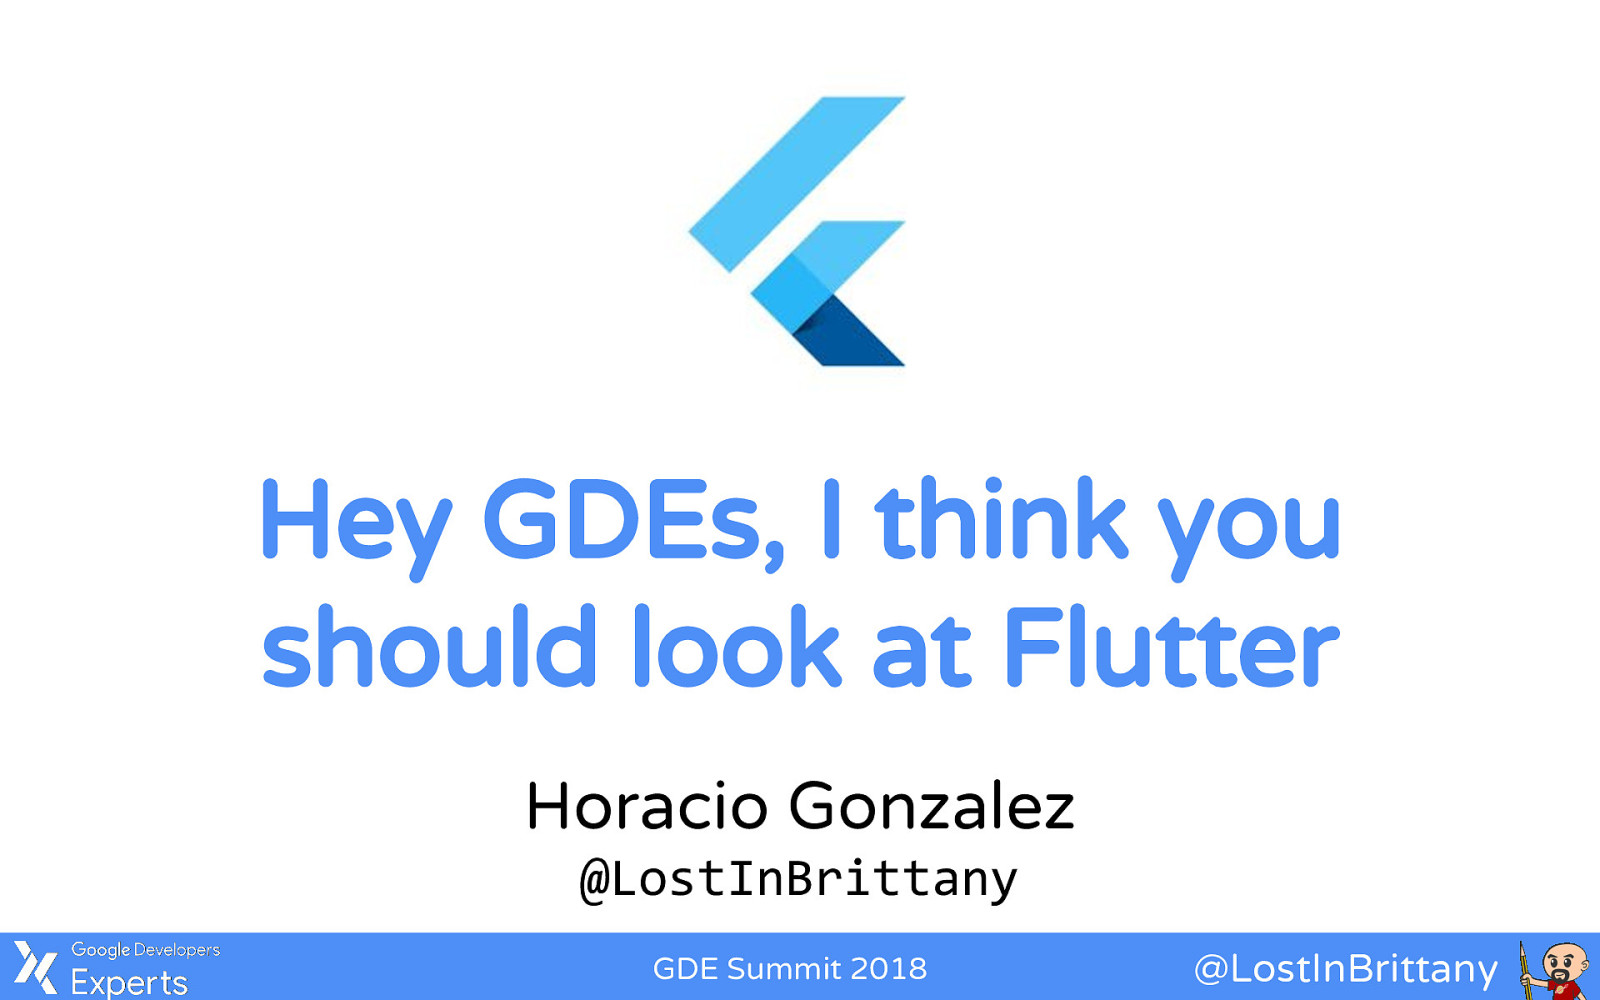 Hey GDEs, I think you should look at Flutter